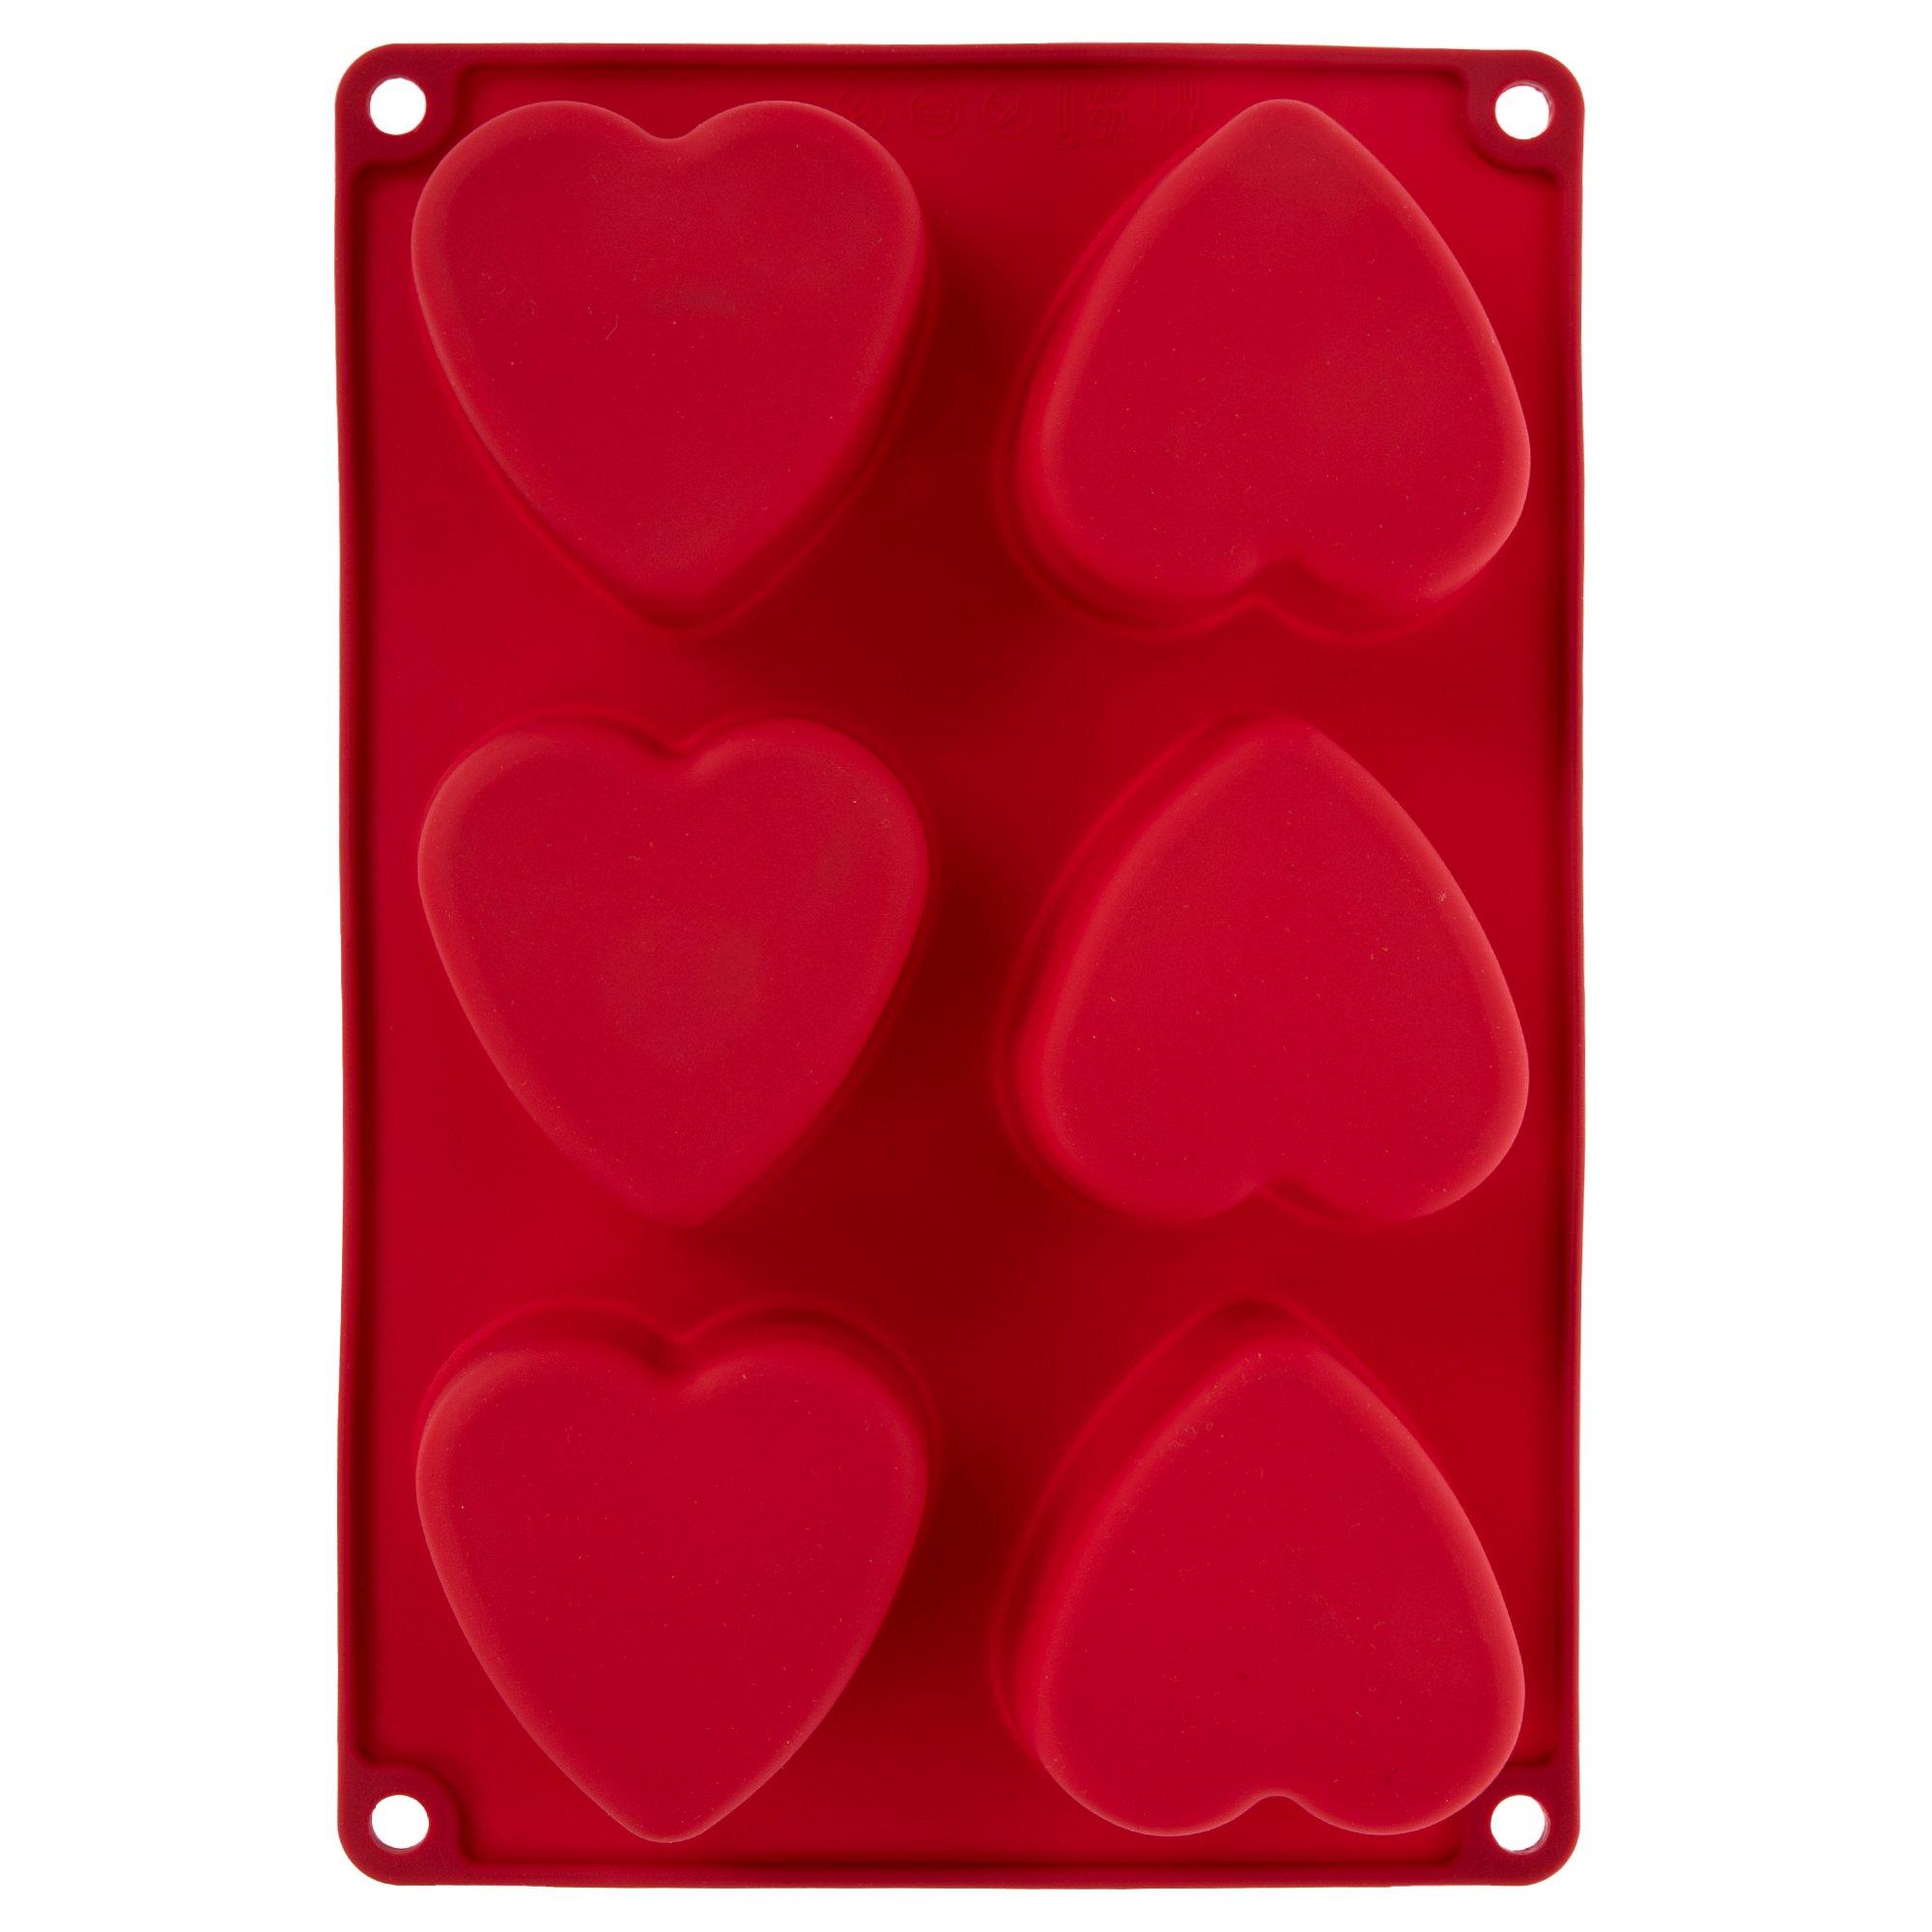 Small Heart Resin Mold Hearts Flexible Plastic Resin Molds Heart Fondant  Mold Heart Chocolate Mold Heart Jewelry Candle Wax Melt 